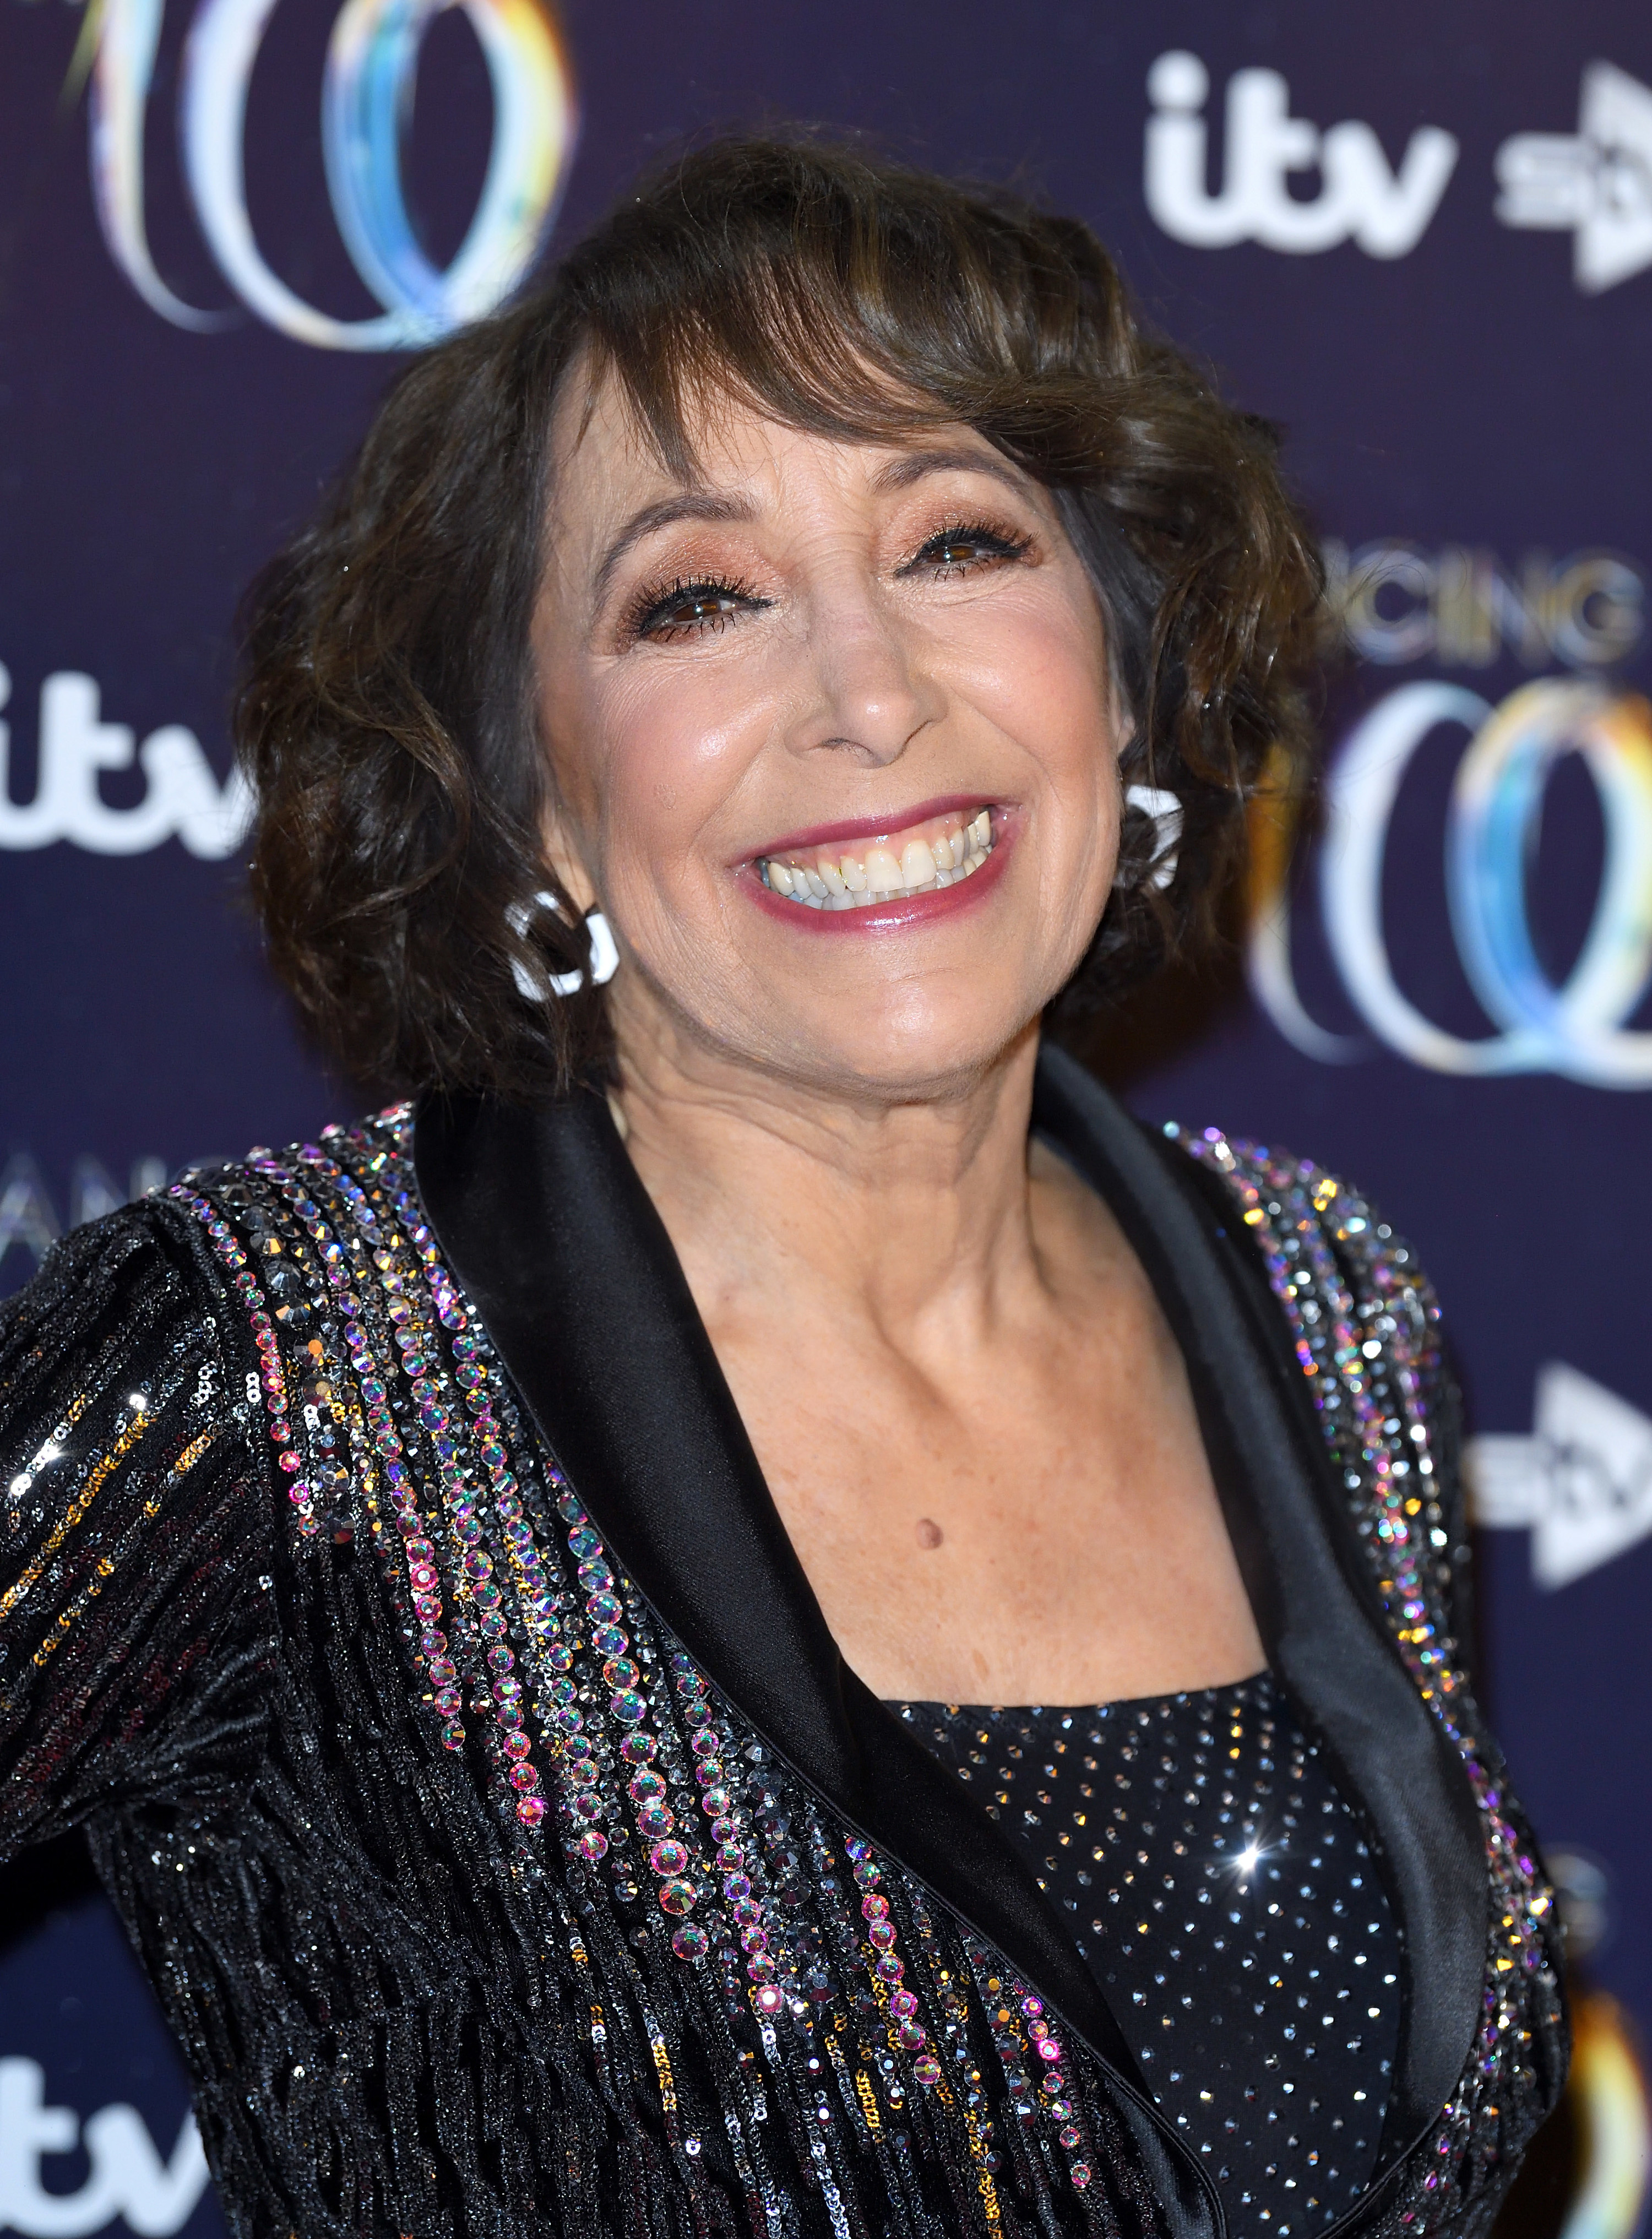 Didi Conn at the Natural History Museum Ice Rink in 2018